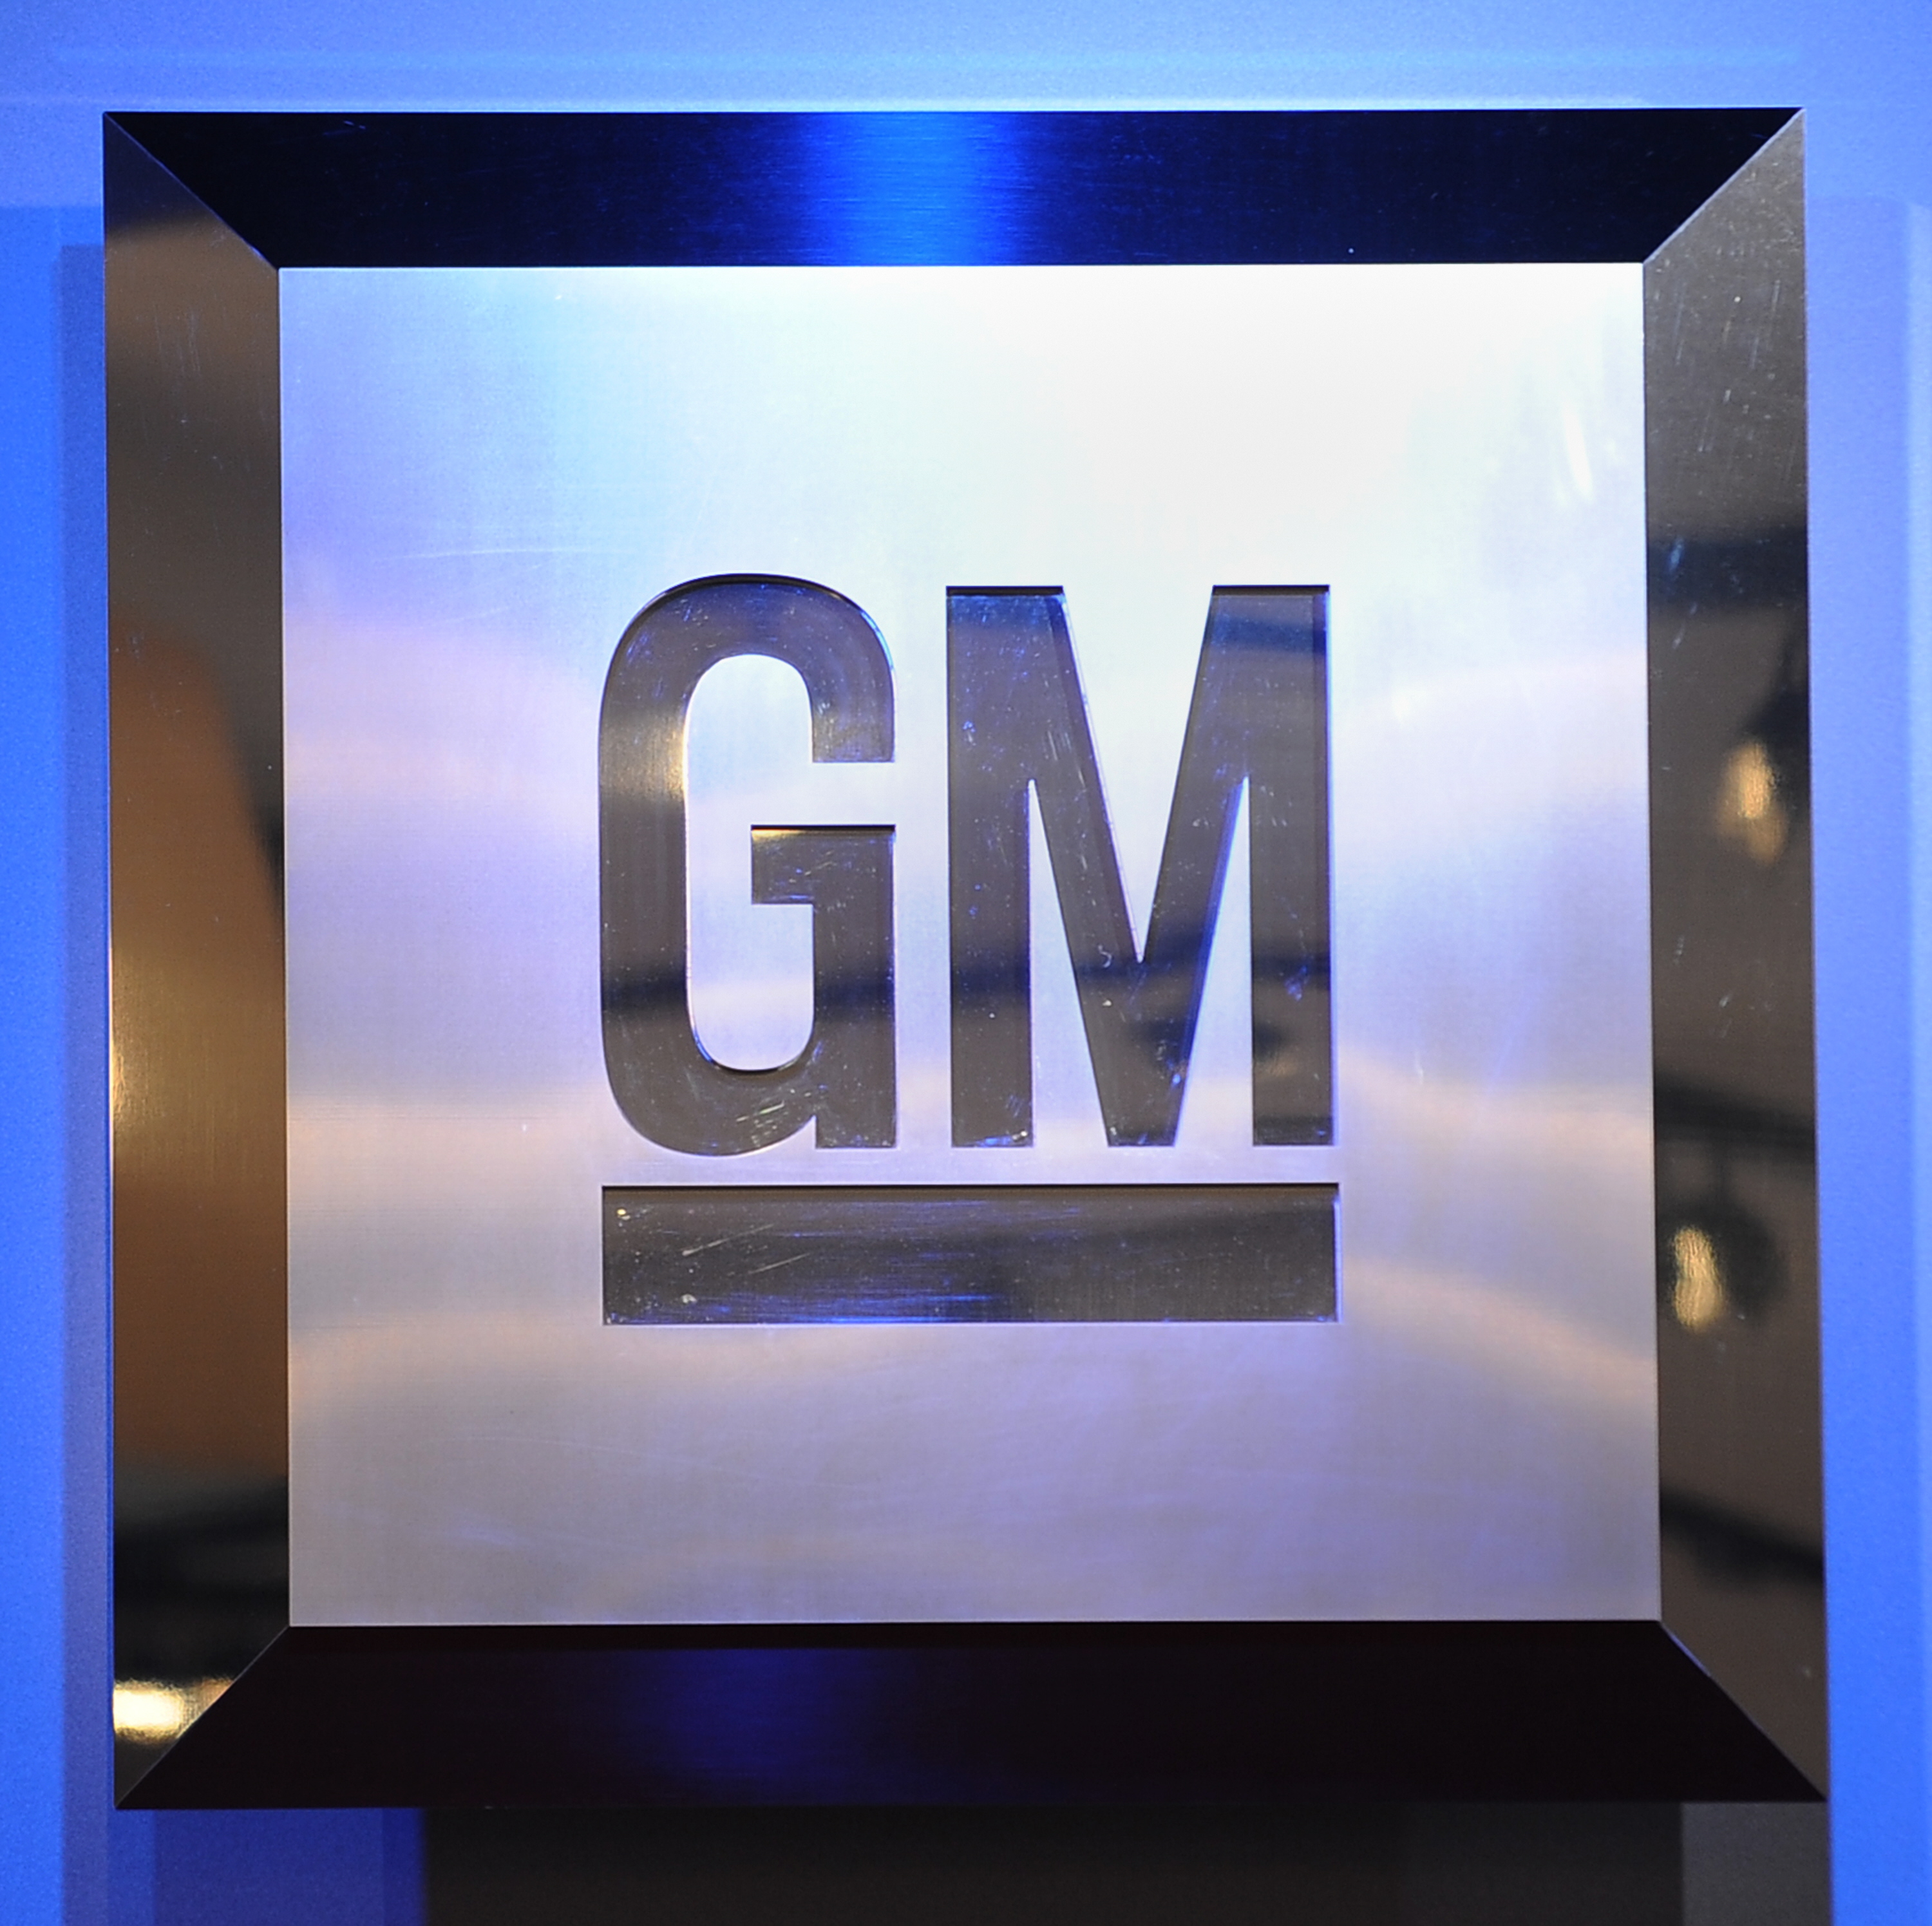 (FILES) This file photo taken on January 12, 2009 shows a logo of General Motors  at the North American International Auto Show in Detroit, Michigan.  US stocks opened lower June 1, 2016 with General motors leading the fall after reporting an 18 percent decline in sales in May. About thirty minutes into trade, the Dow Jones Industrial Average was down 0.50 percent 17,697.73. The broad-market S&P 500 lost 0.34 percent to 2,089.75, while the tech-heavy Nasdaq Composite dropped 0.27 percent to 4,934.90.  / AFP PHOTO / AFP FILES / STAN HONDA